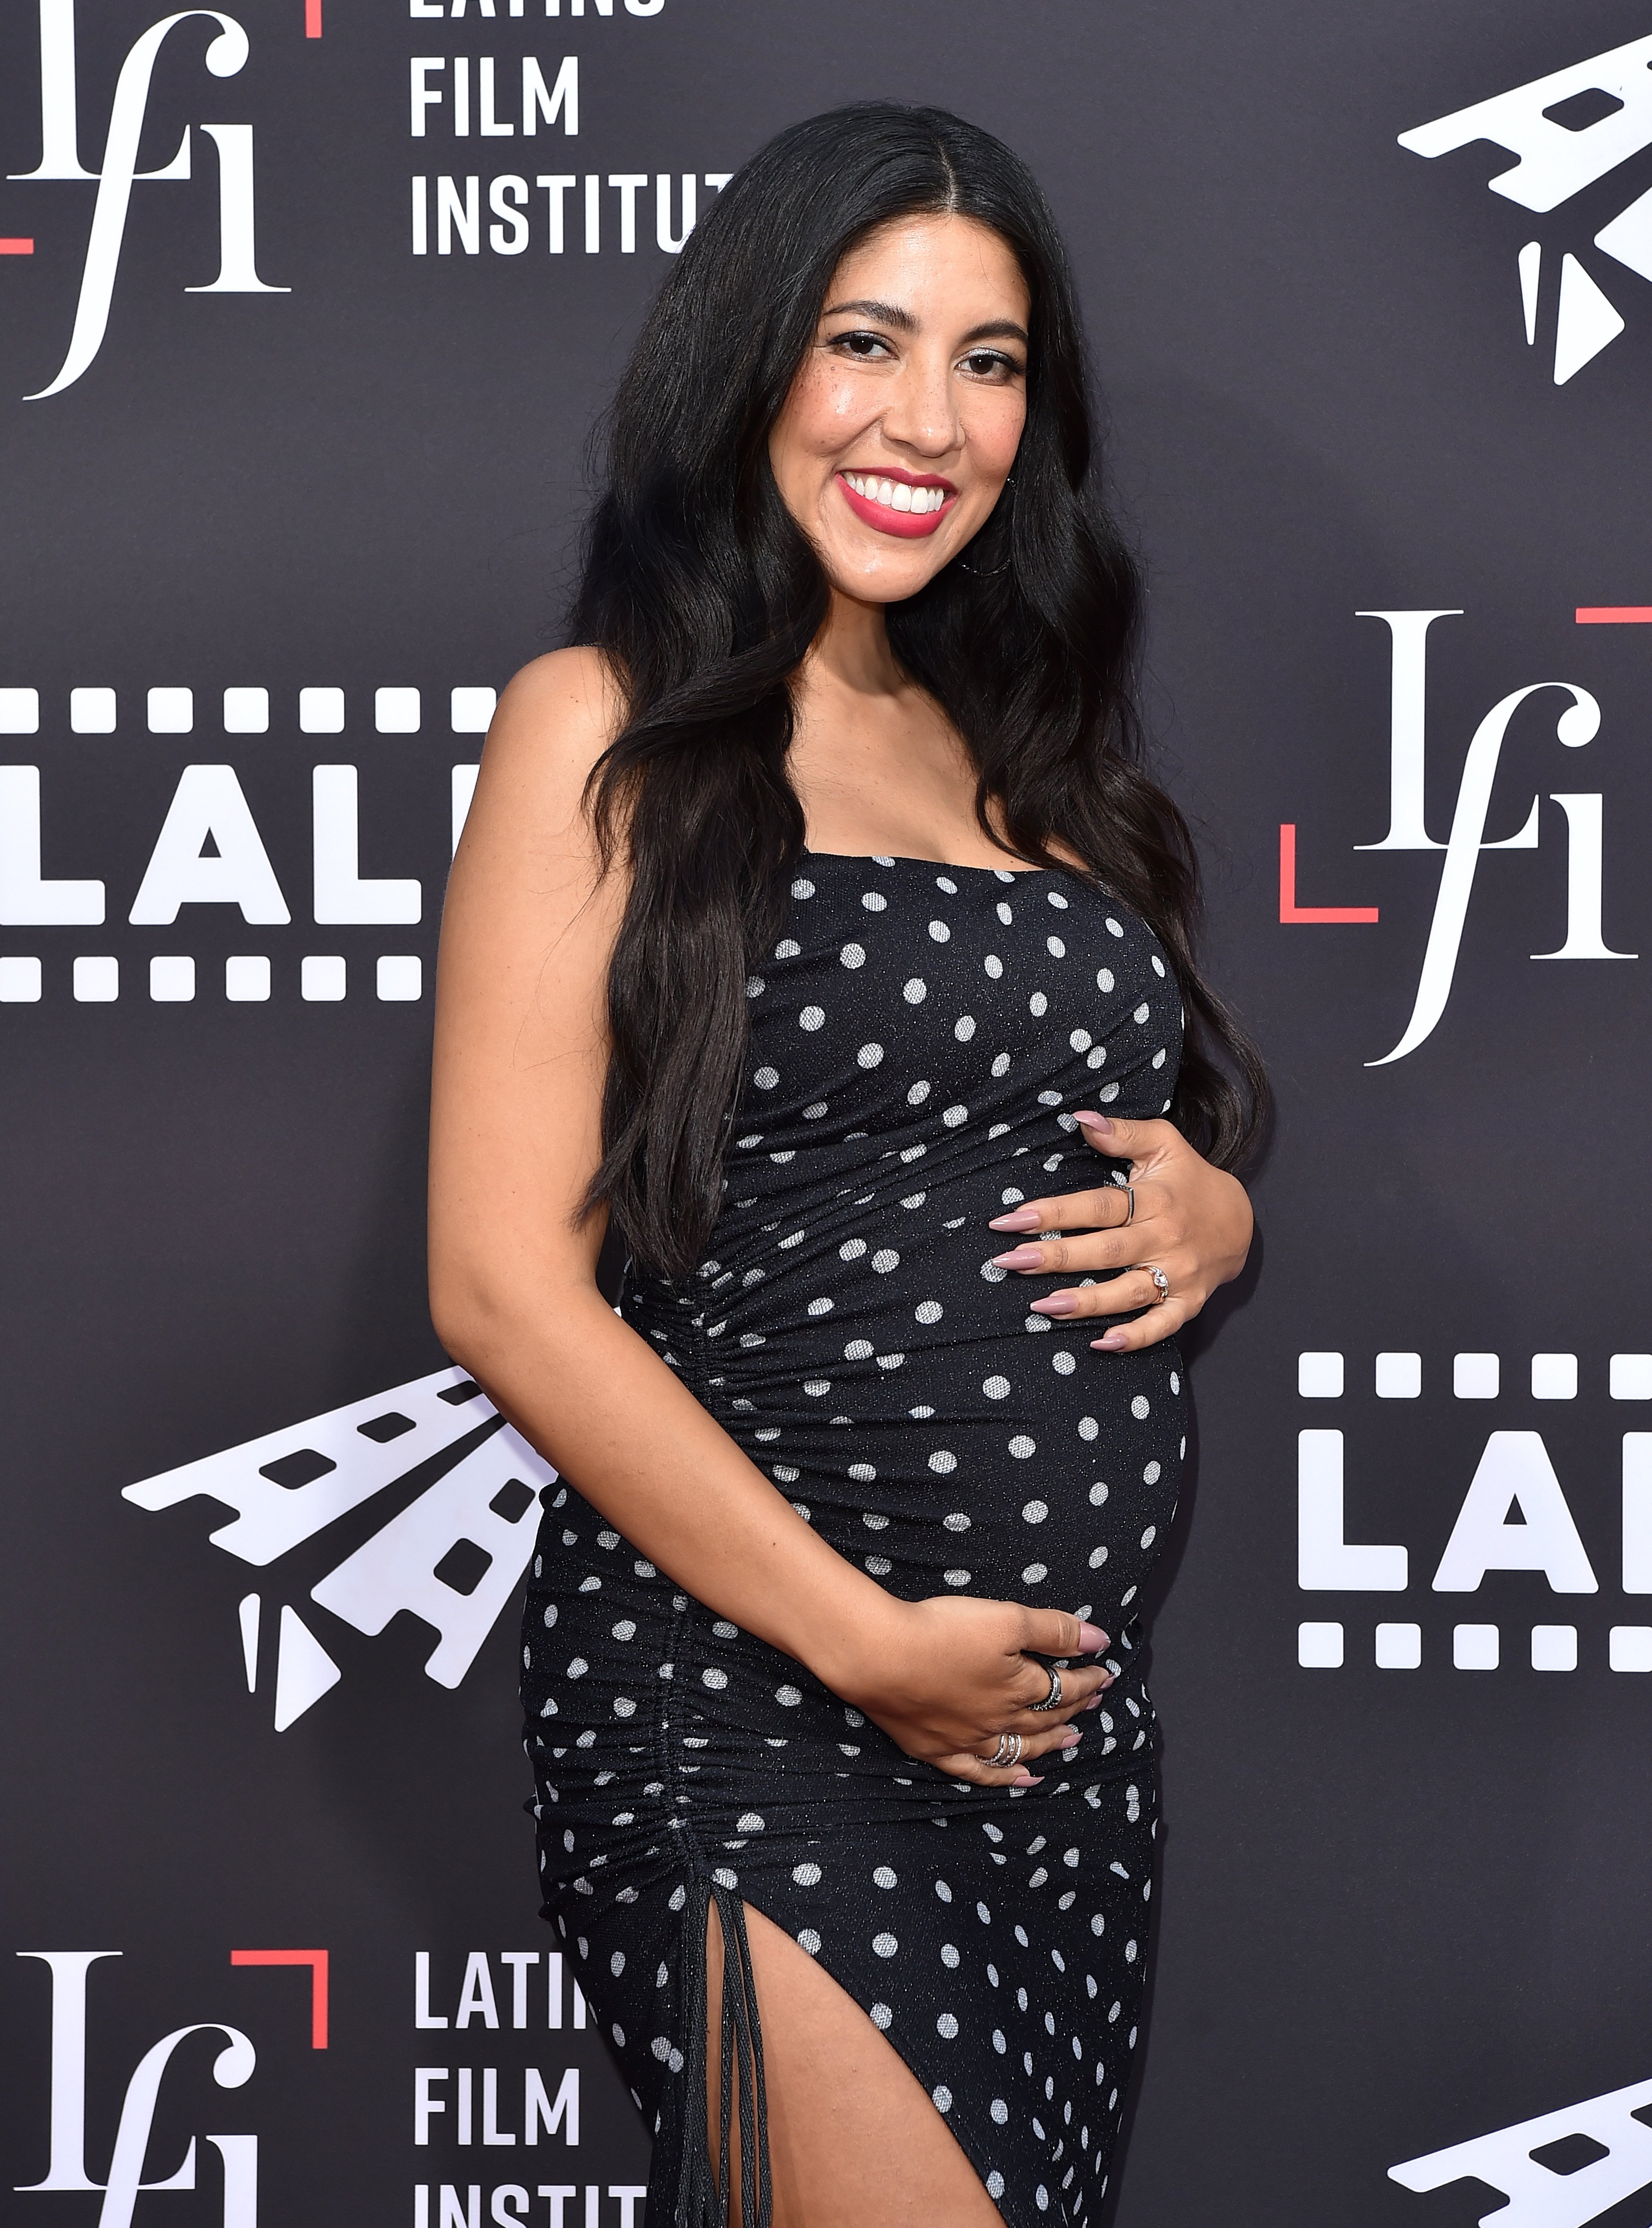 Stephanie Beatriz at the 2021 Los Angeles Latino International Film Festival Special Preview Screening of "In The Heights" at TCL Chinese Theatre in Hollywood, California | Photo: Axelle/Bauer-Griffin/FilmMagic via Getty Images